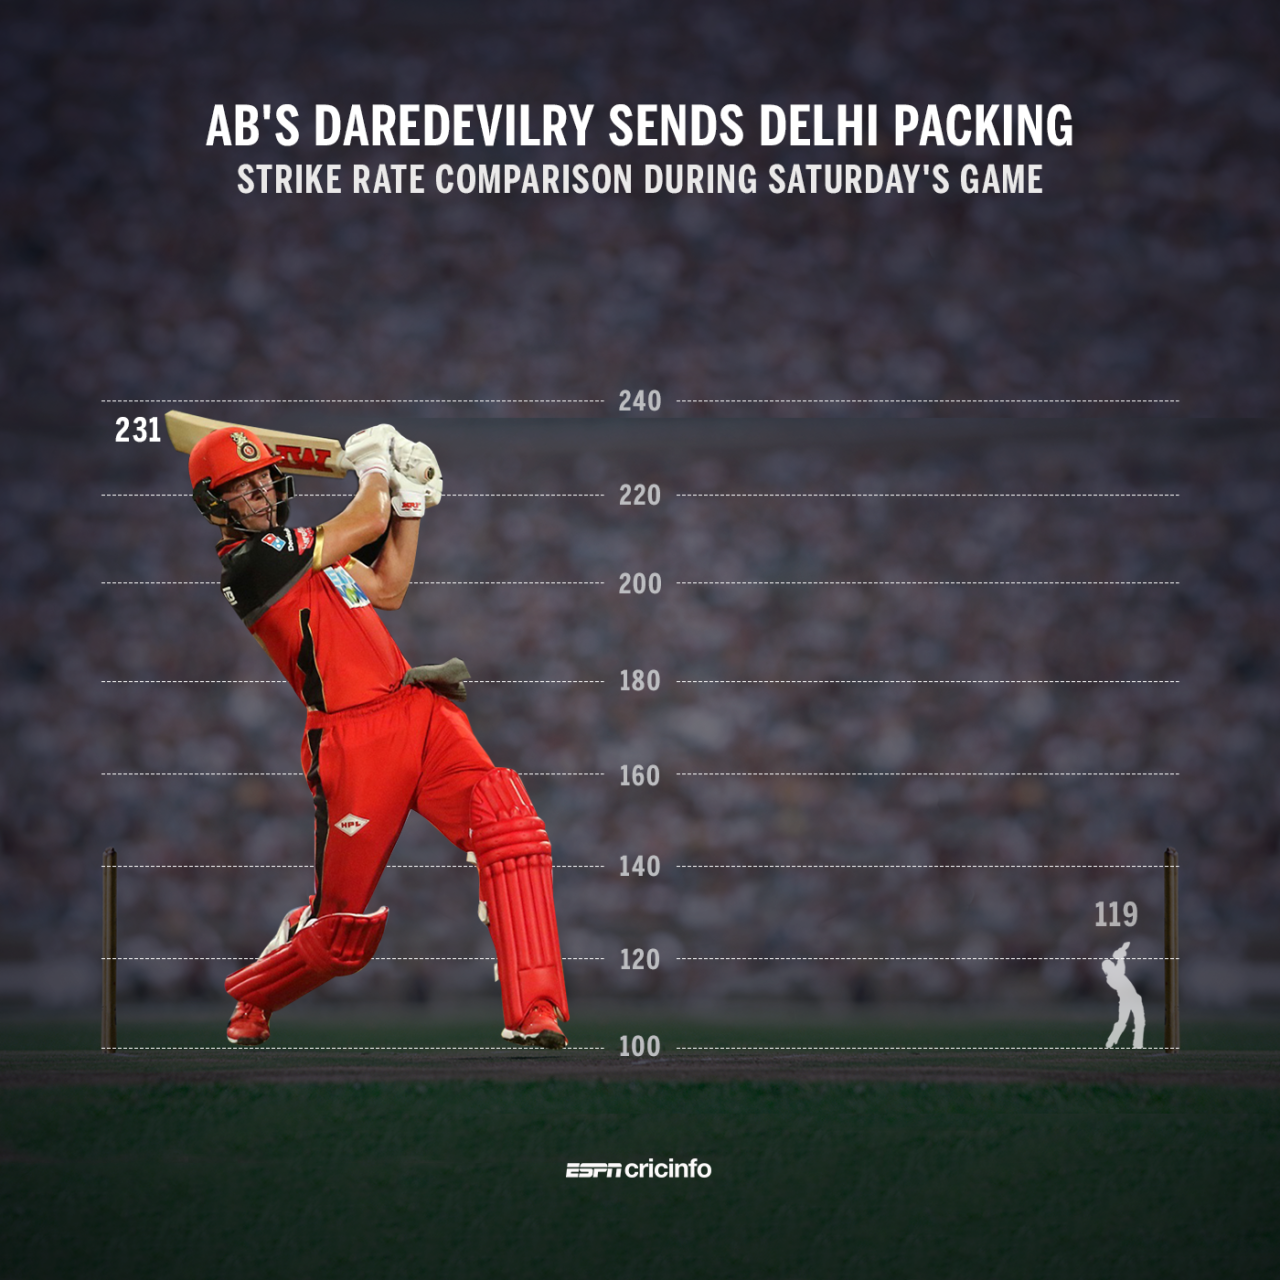 AB de Villiers' strike rate compared to the rest of the RCB batsmen's in this game